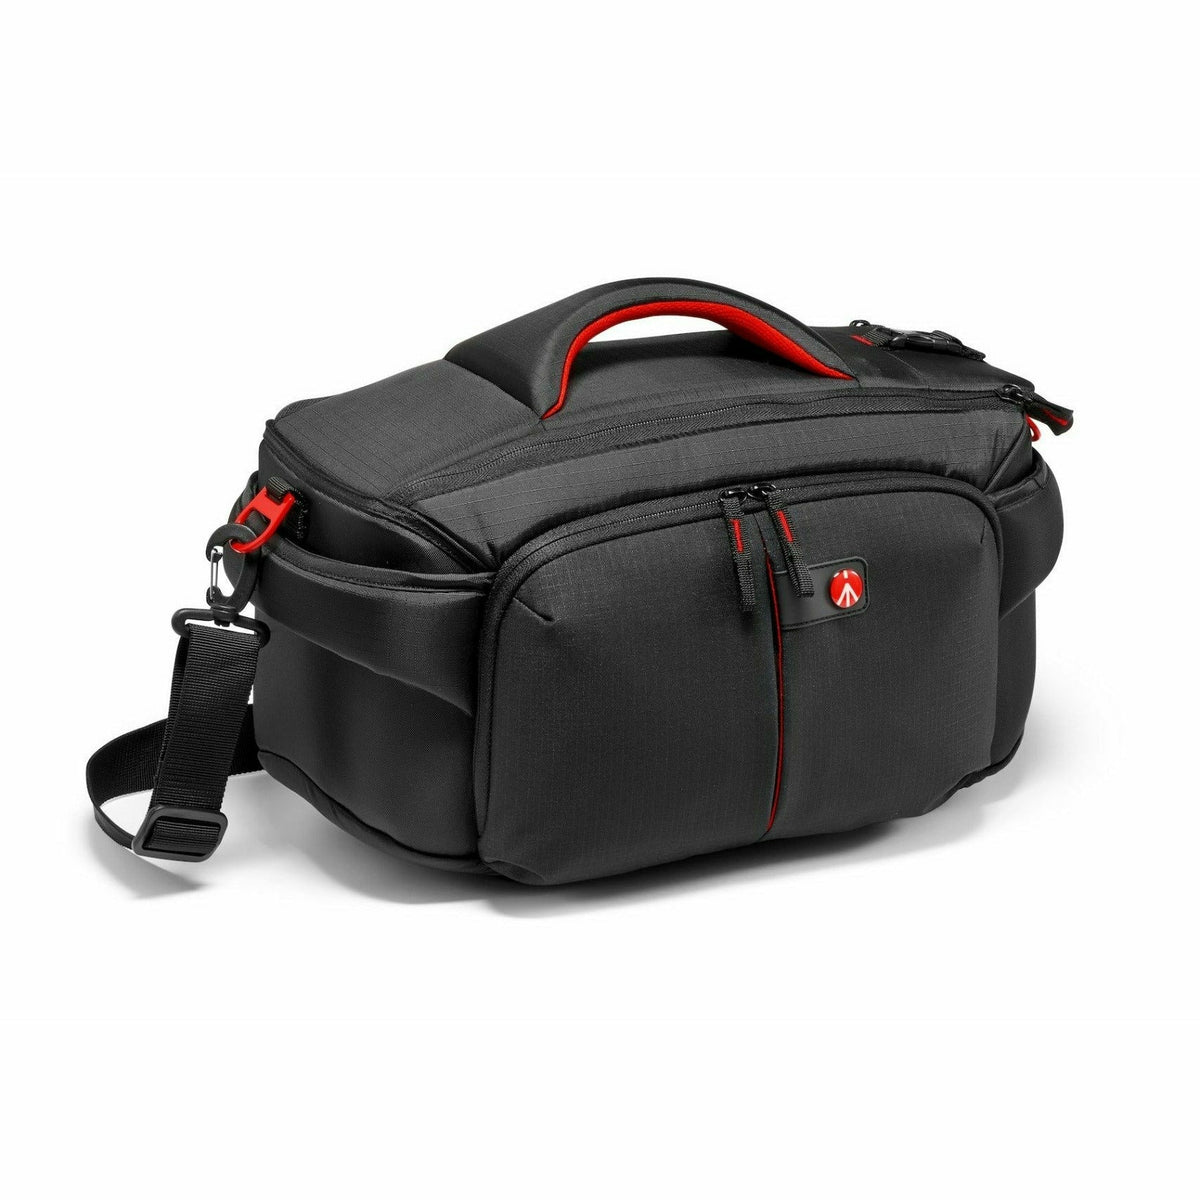 MANFROTTO MBPLCC191N Case Video Pro-Light Small - Dragon Image